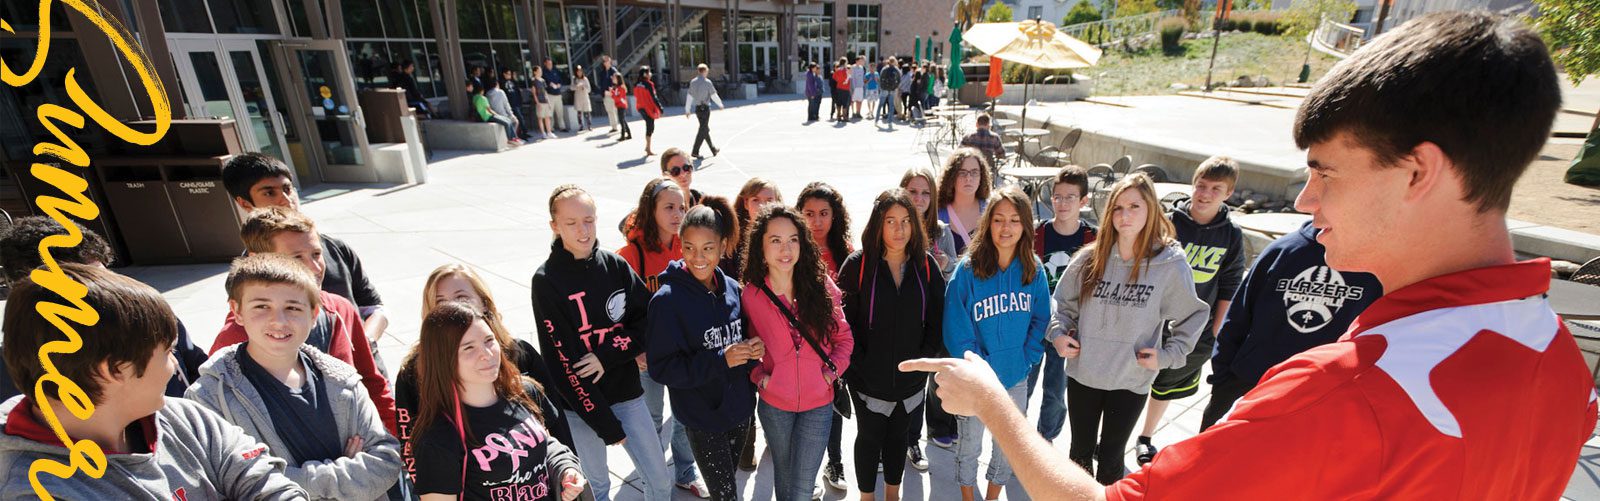 High school students on a tour of campus.